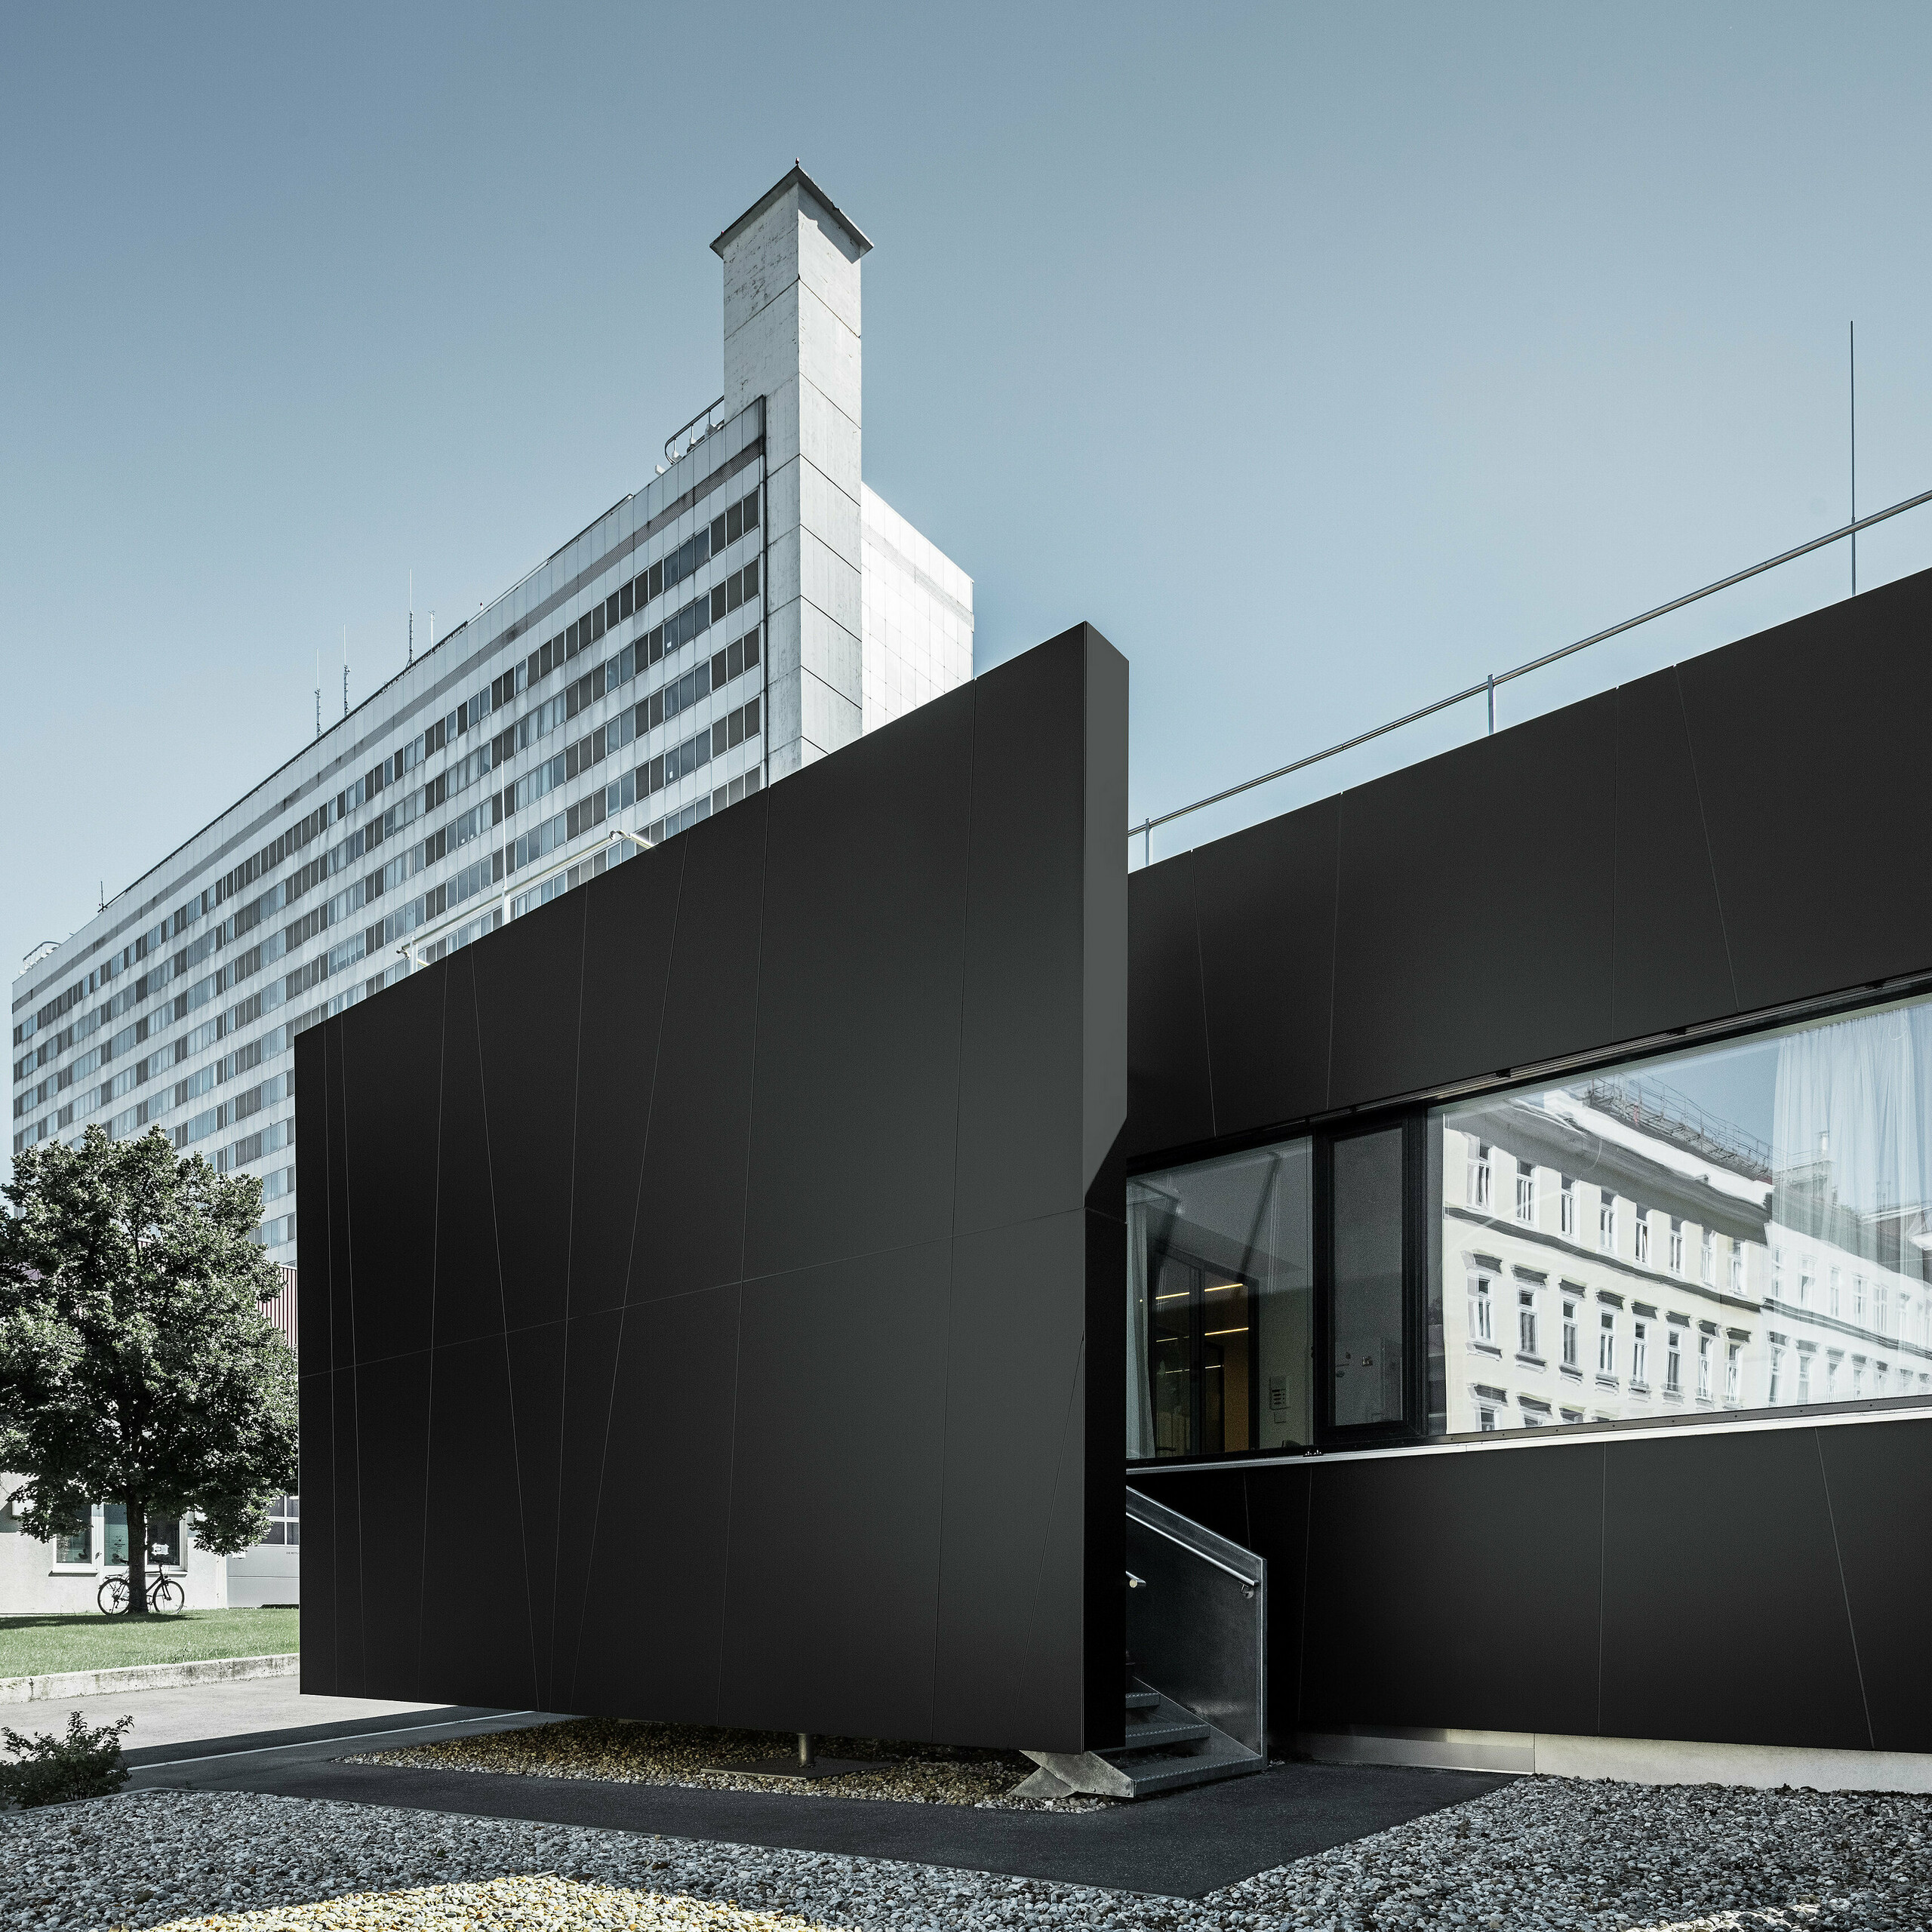 The frontal view of the Central A&E Department at the Landstraße Clinic on Juchgasse, Vienna, was clad with black grey PREFABOND aluminium composite panels.